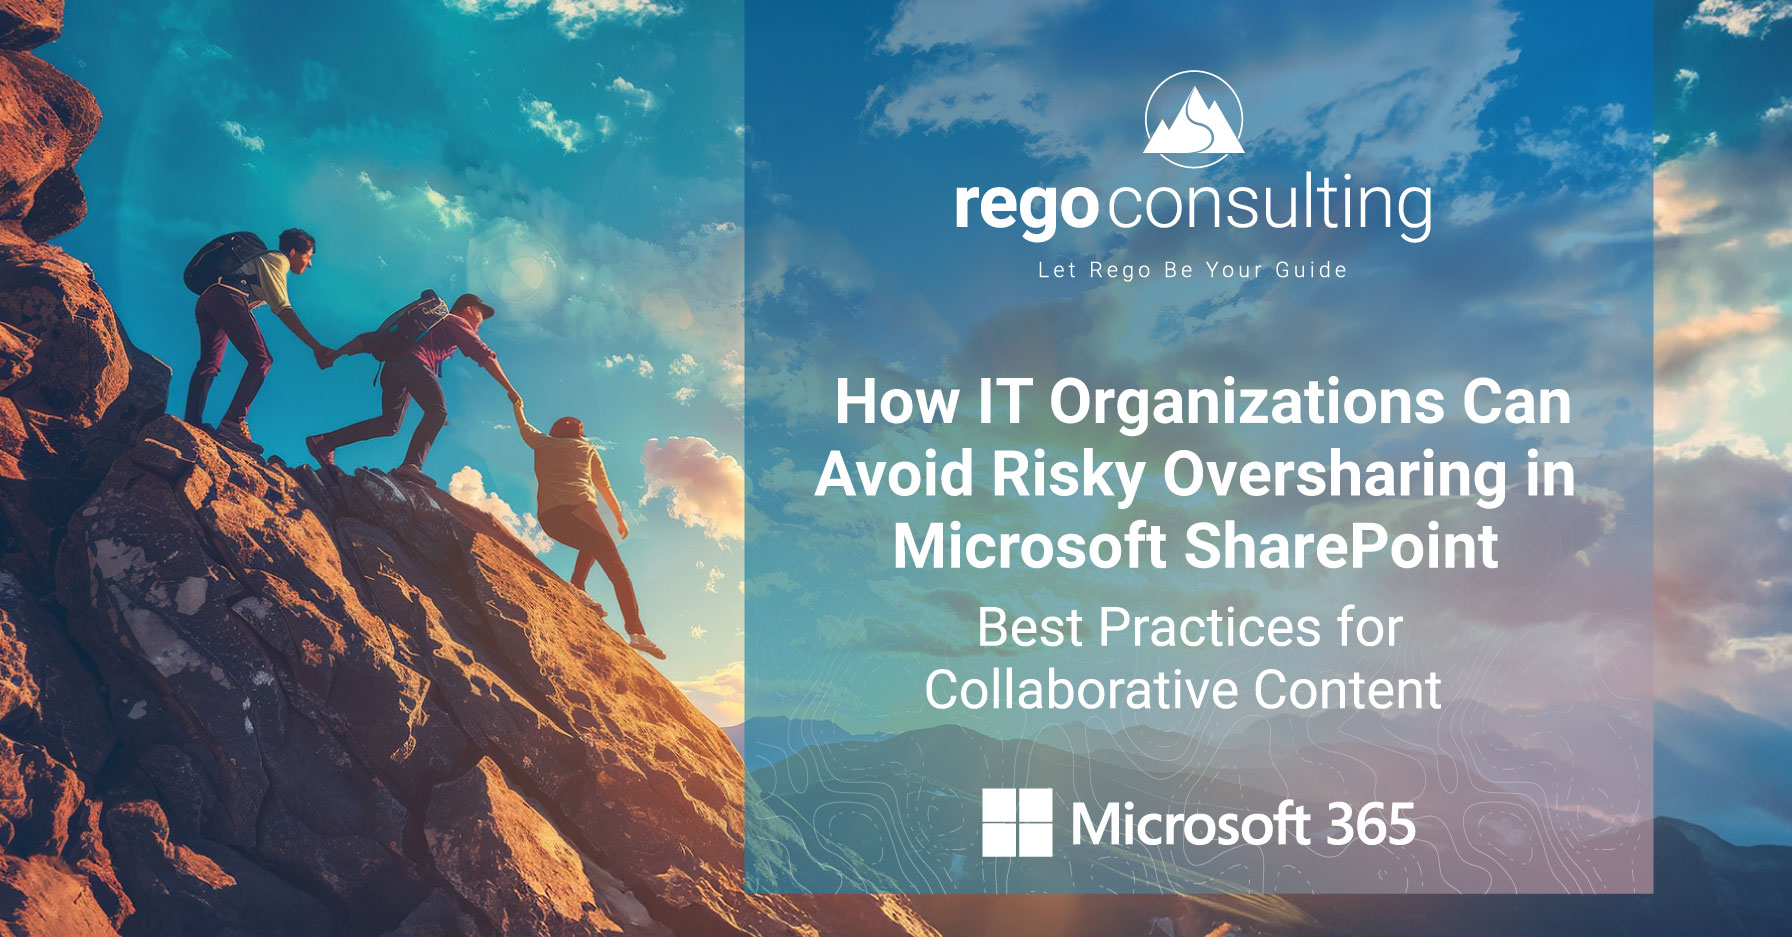 How to Avoid Risky Oversharing in Microsoft SharePoint, with image of hikers on steep rocks